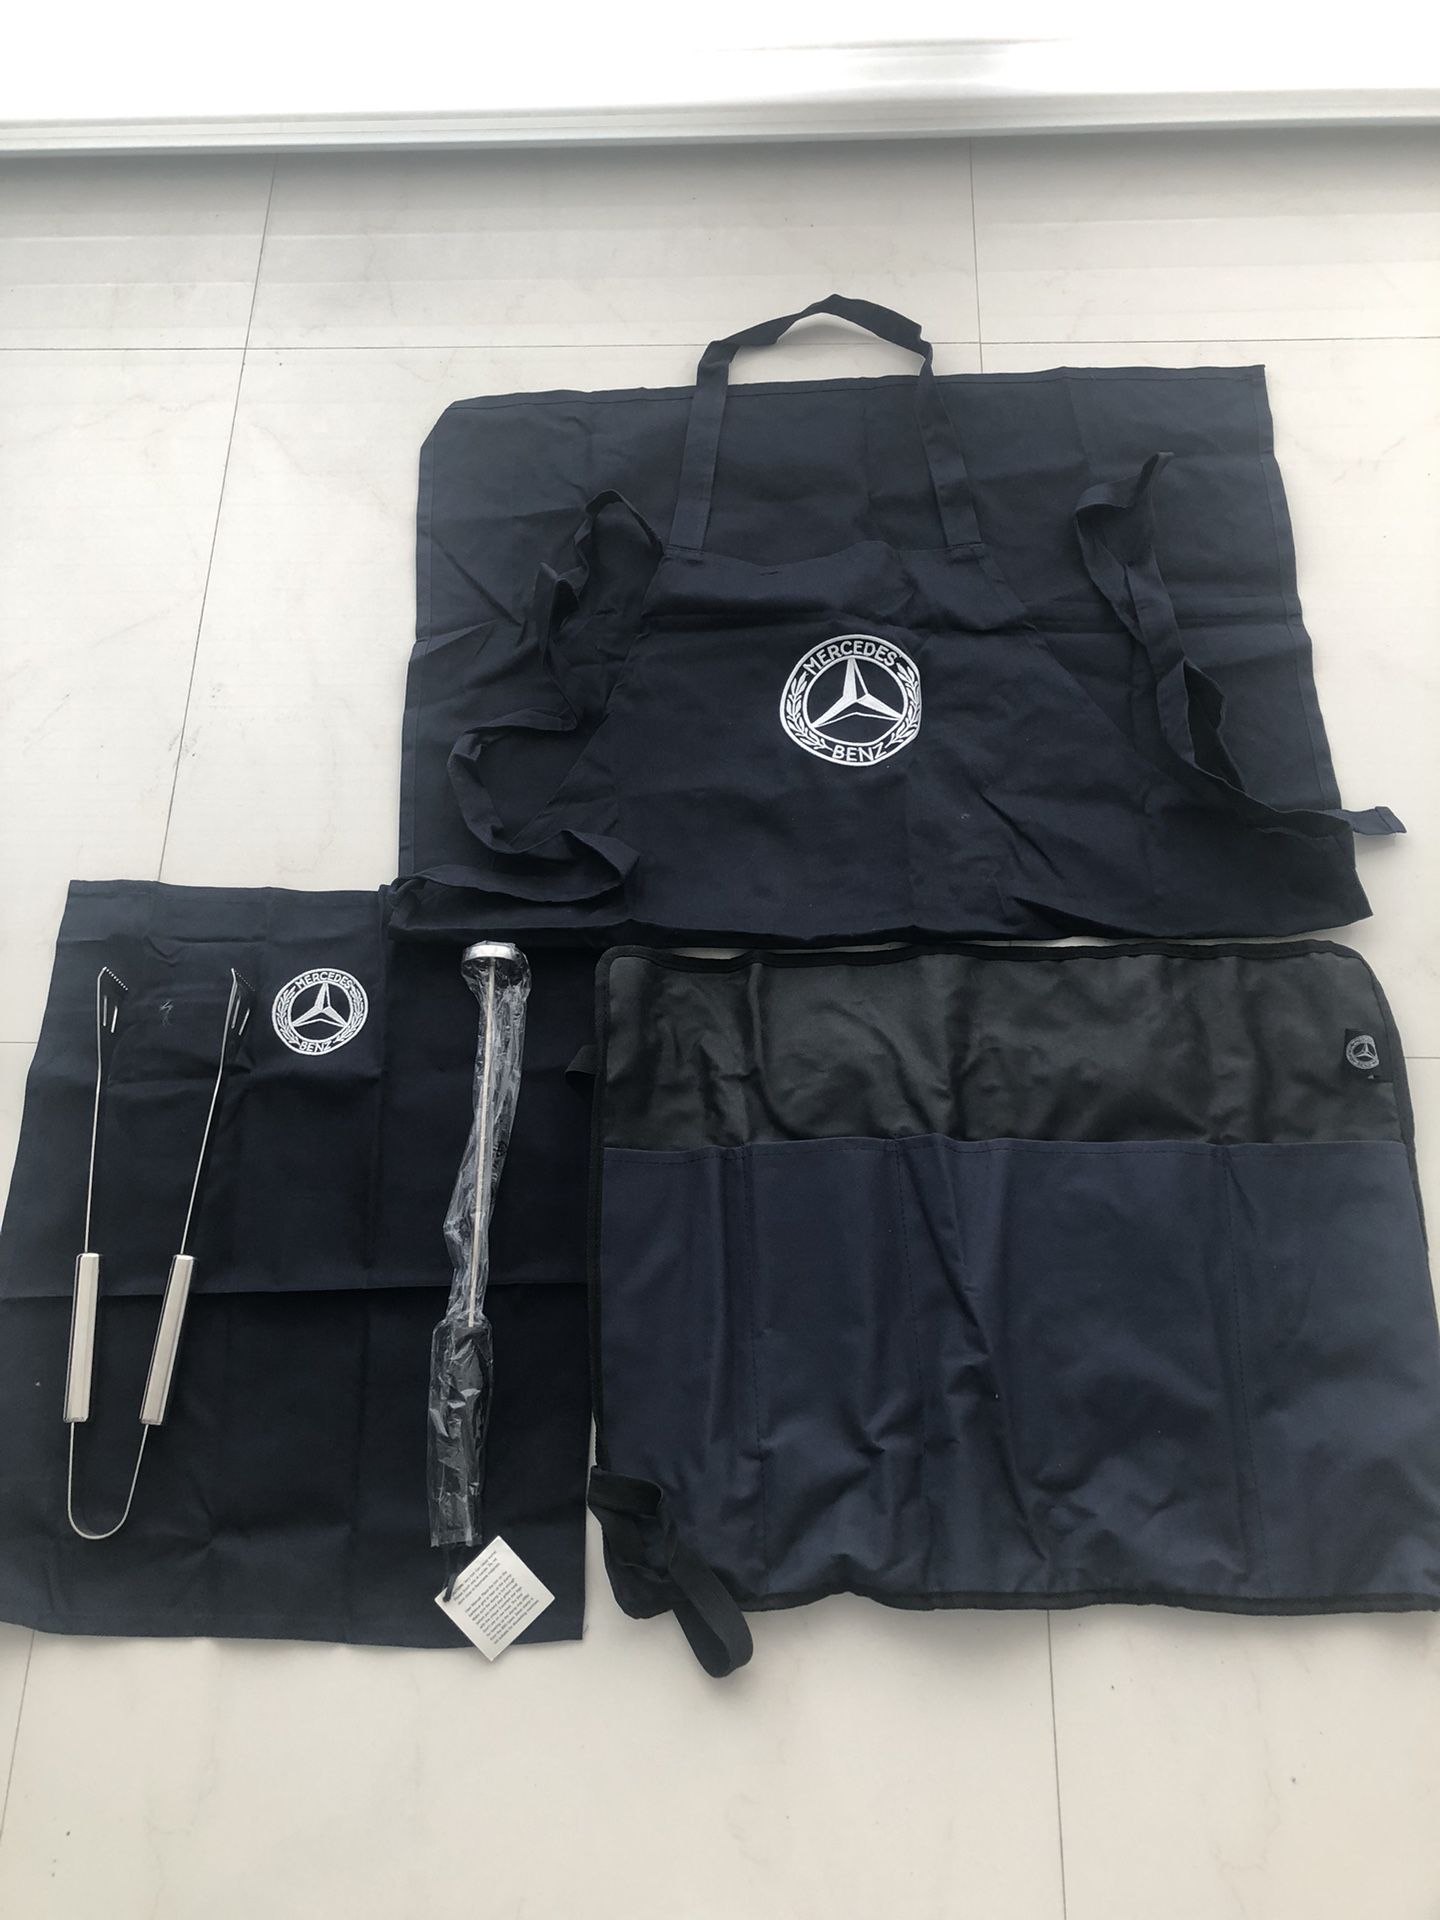 Mercedes Benz BBQ Set for Sale in Laud By Sea, FL - OfferUp